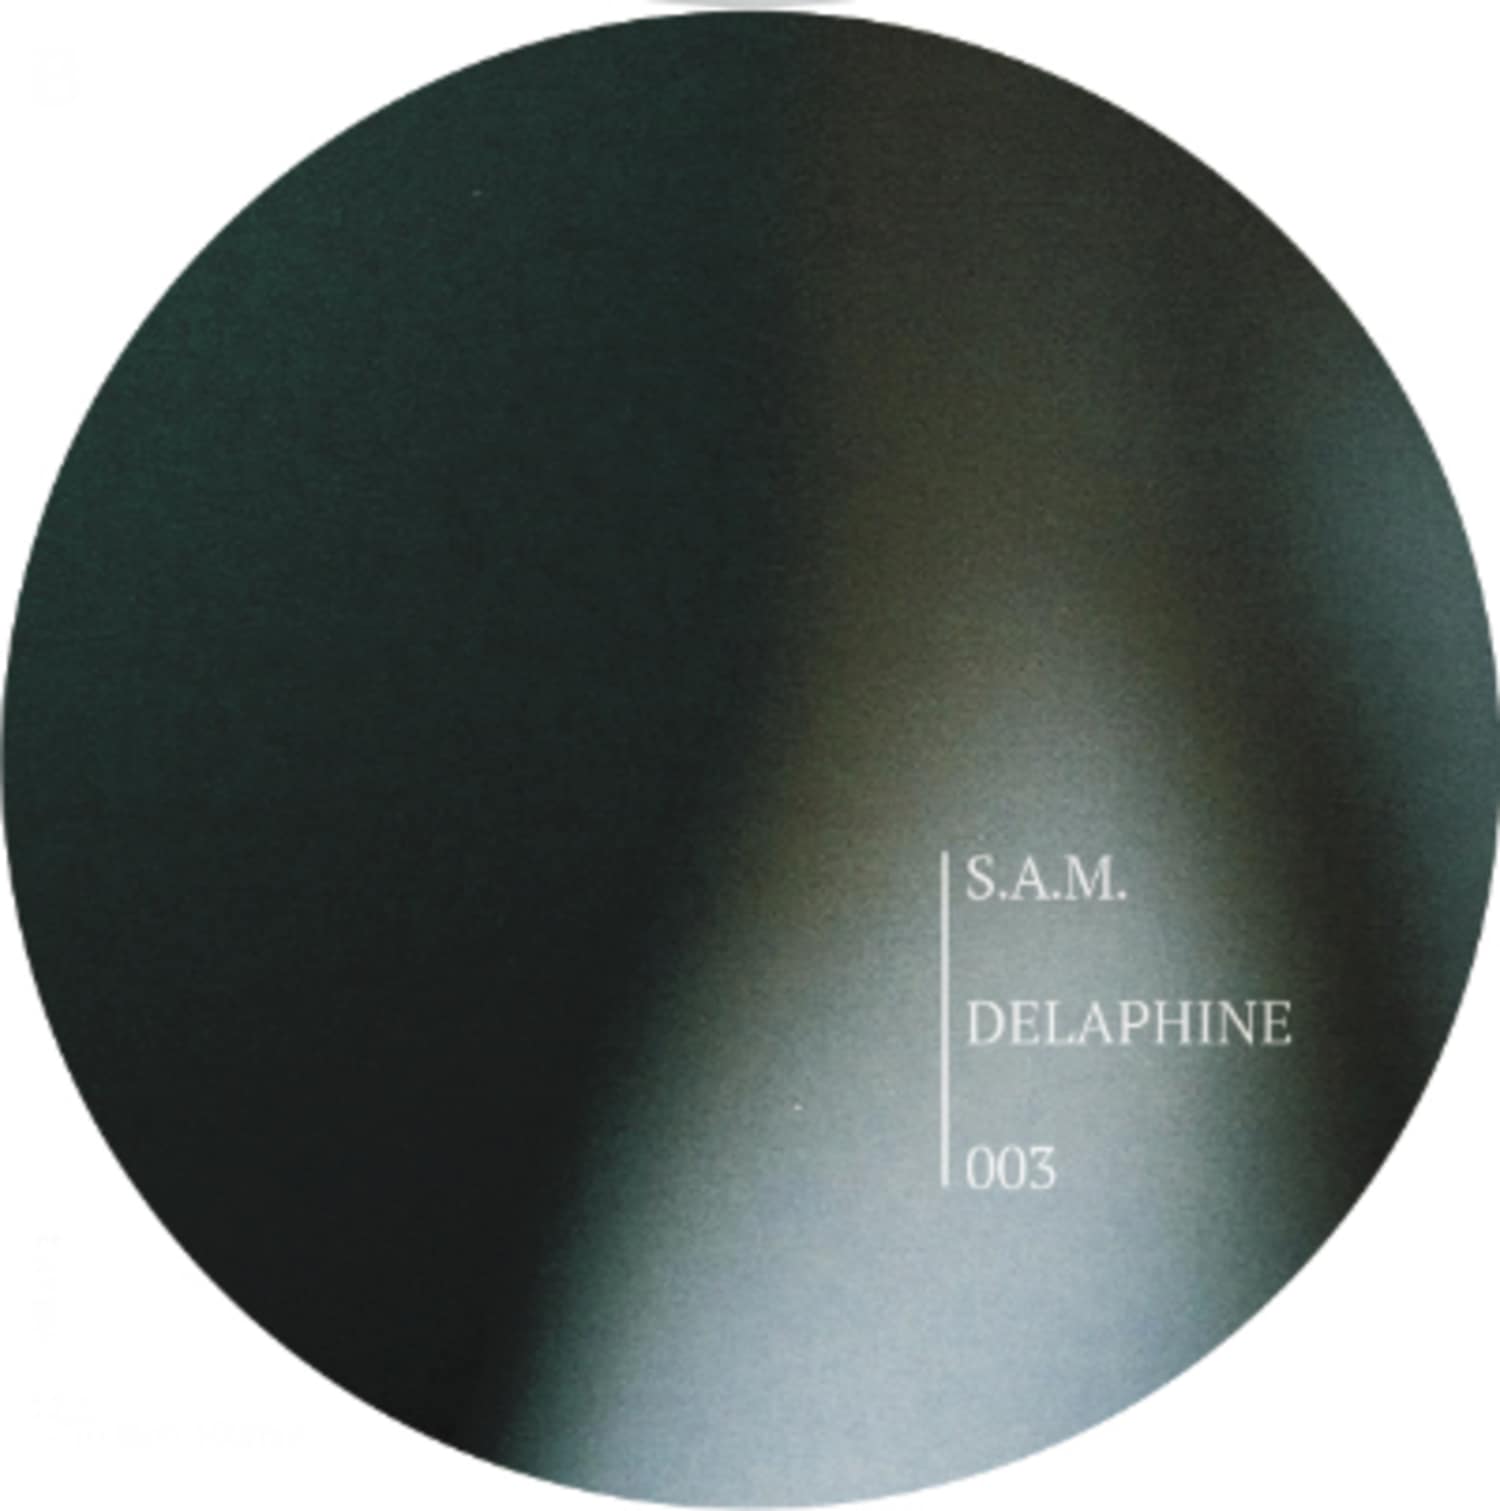 S.A.M. - DELAPHINE 003 